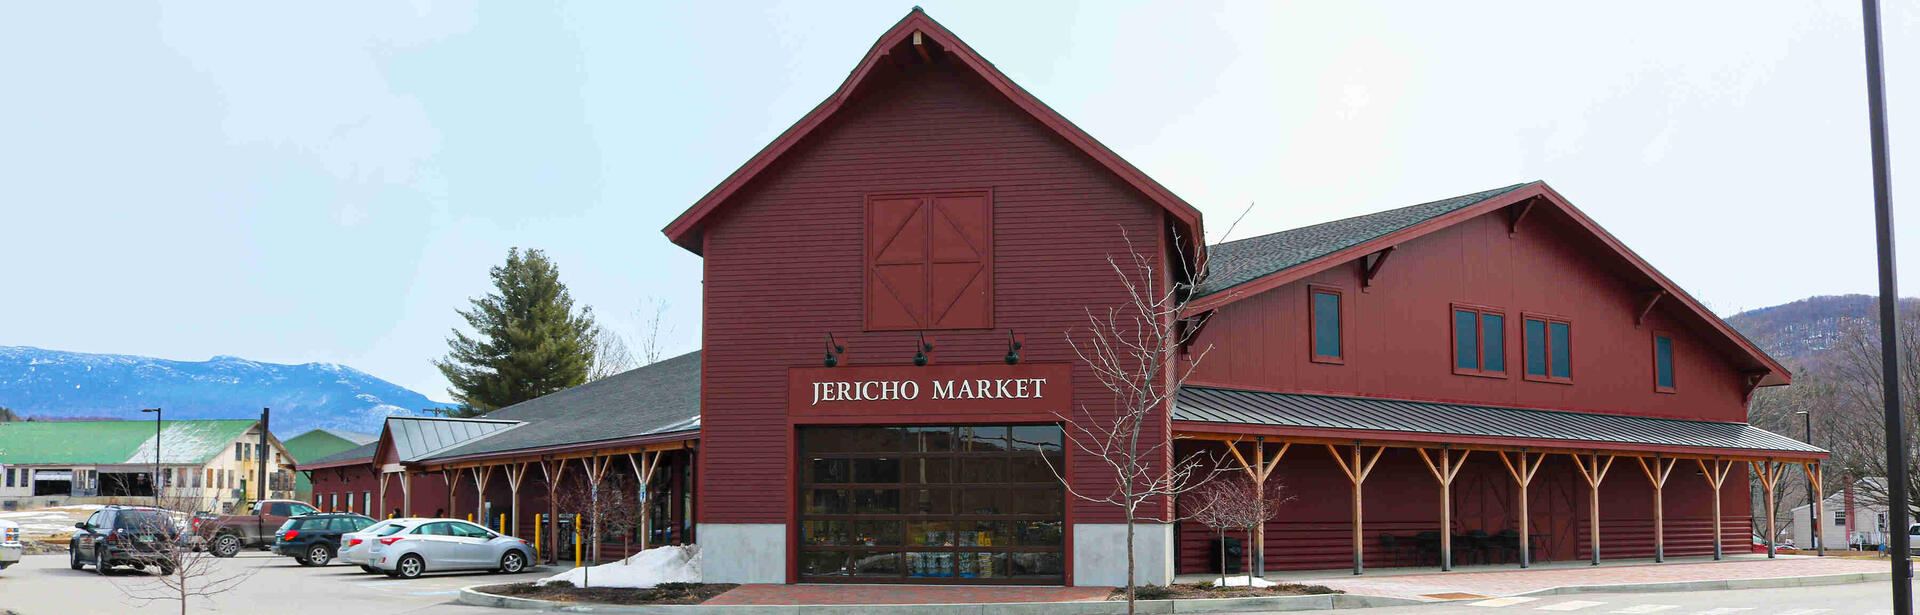 A picture of the Jericho Market.